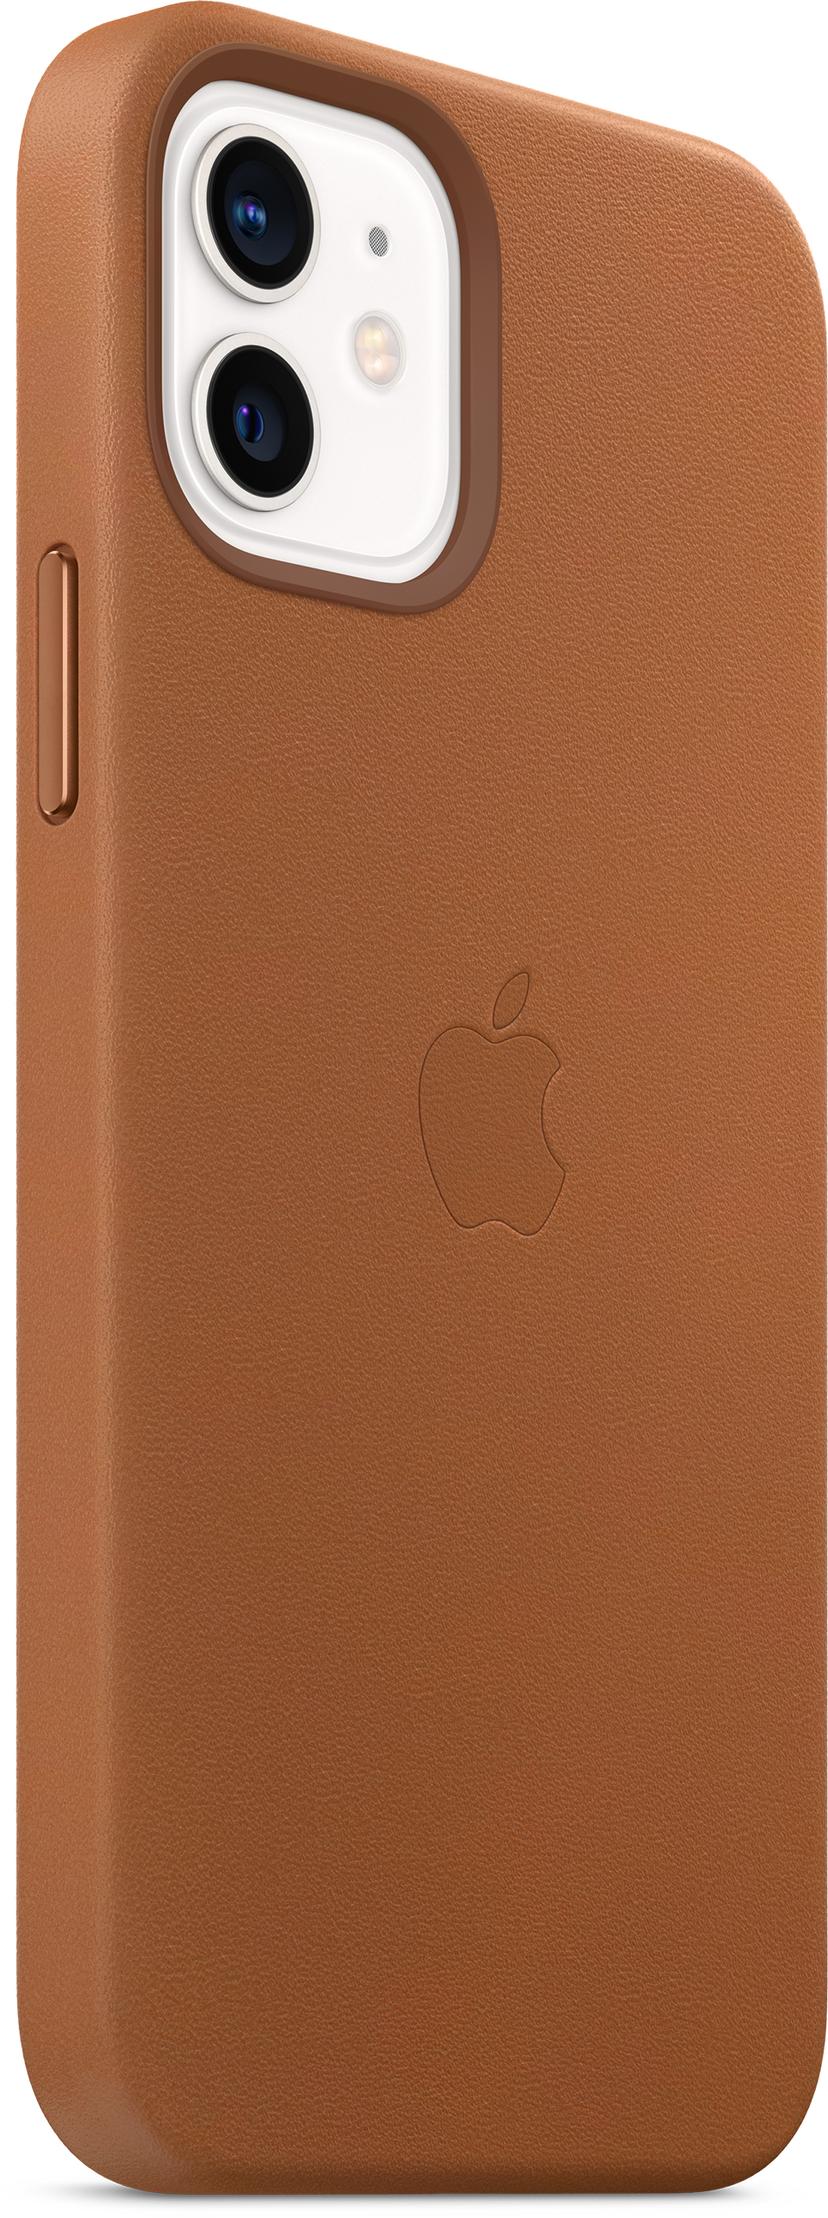 Apple Leather Case with MagSafe iPhone 12, iPhone 12 Pro Saddle brown